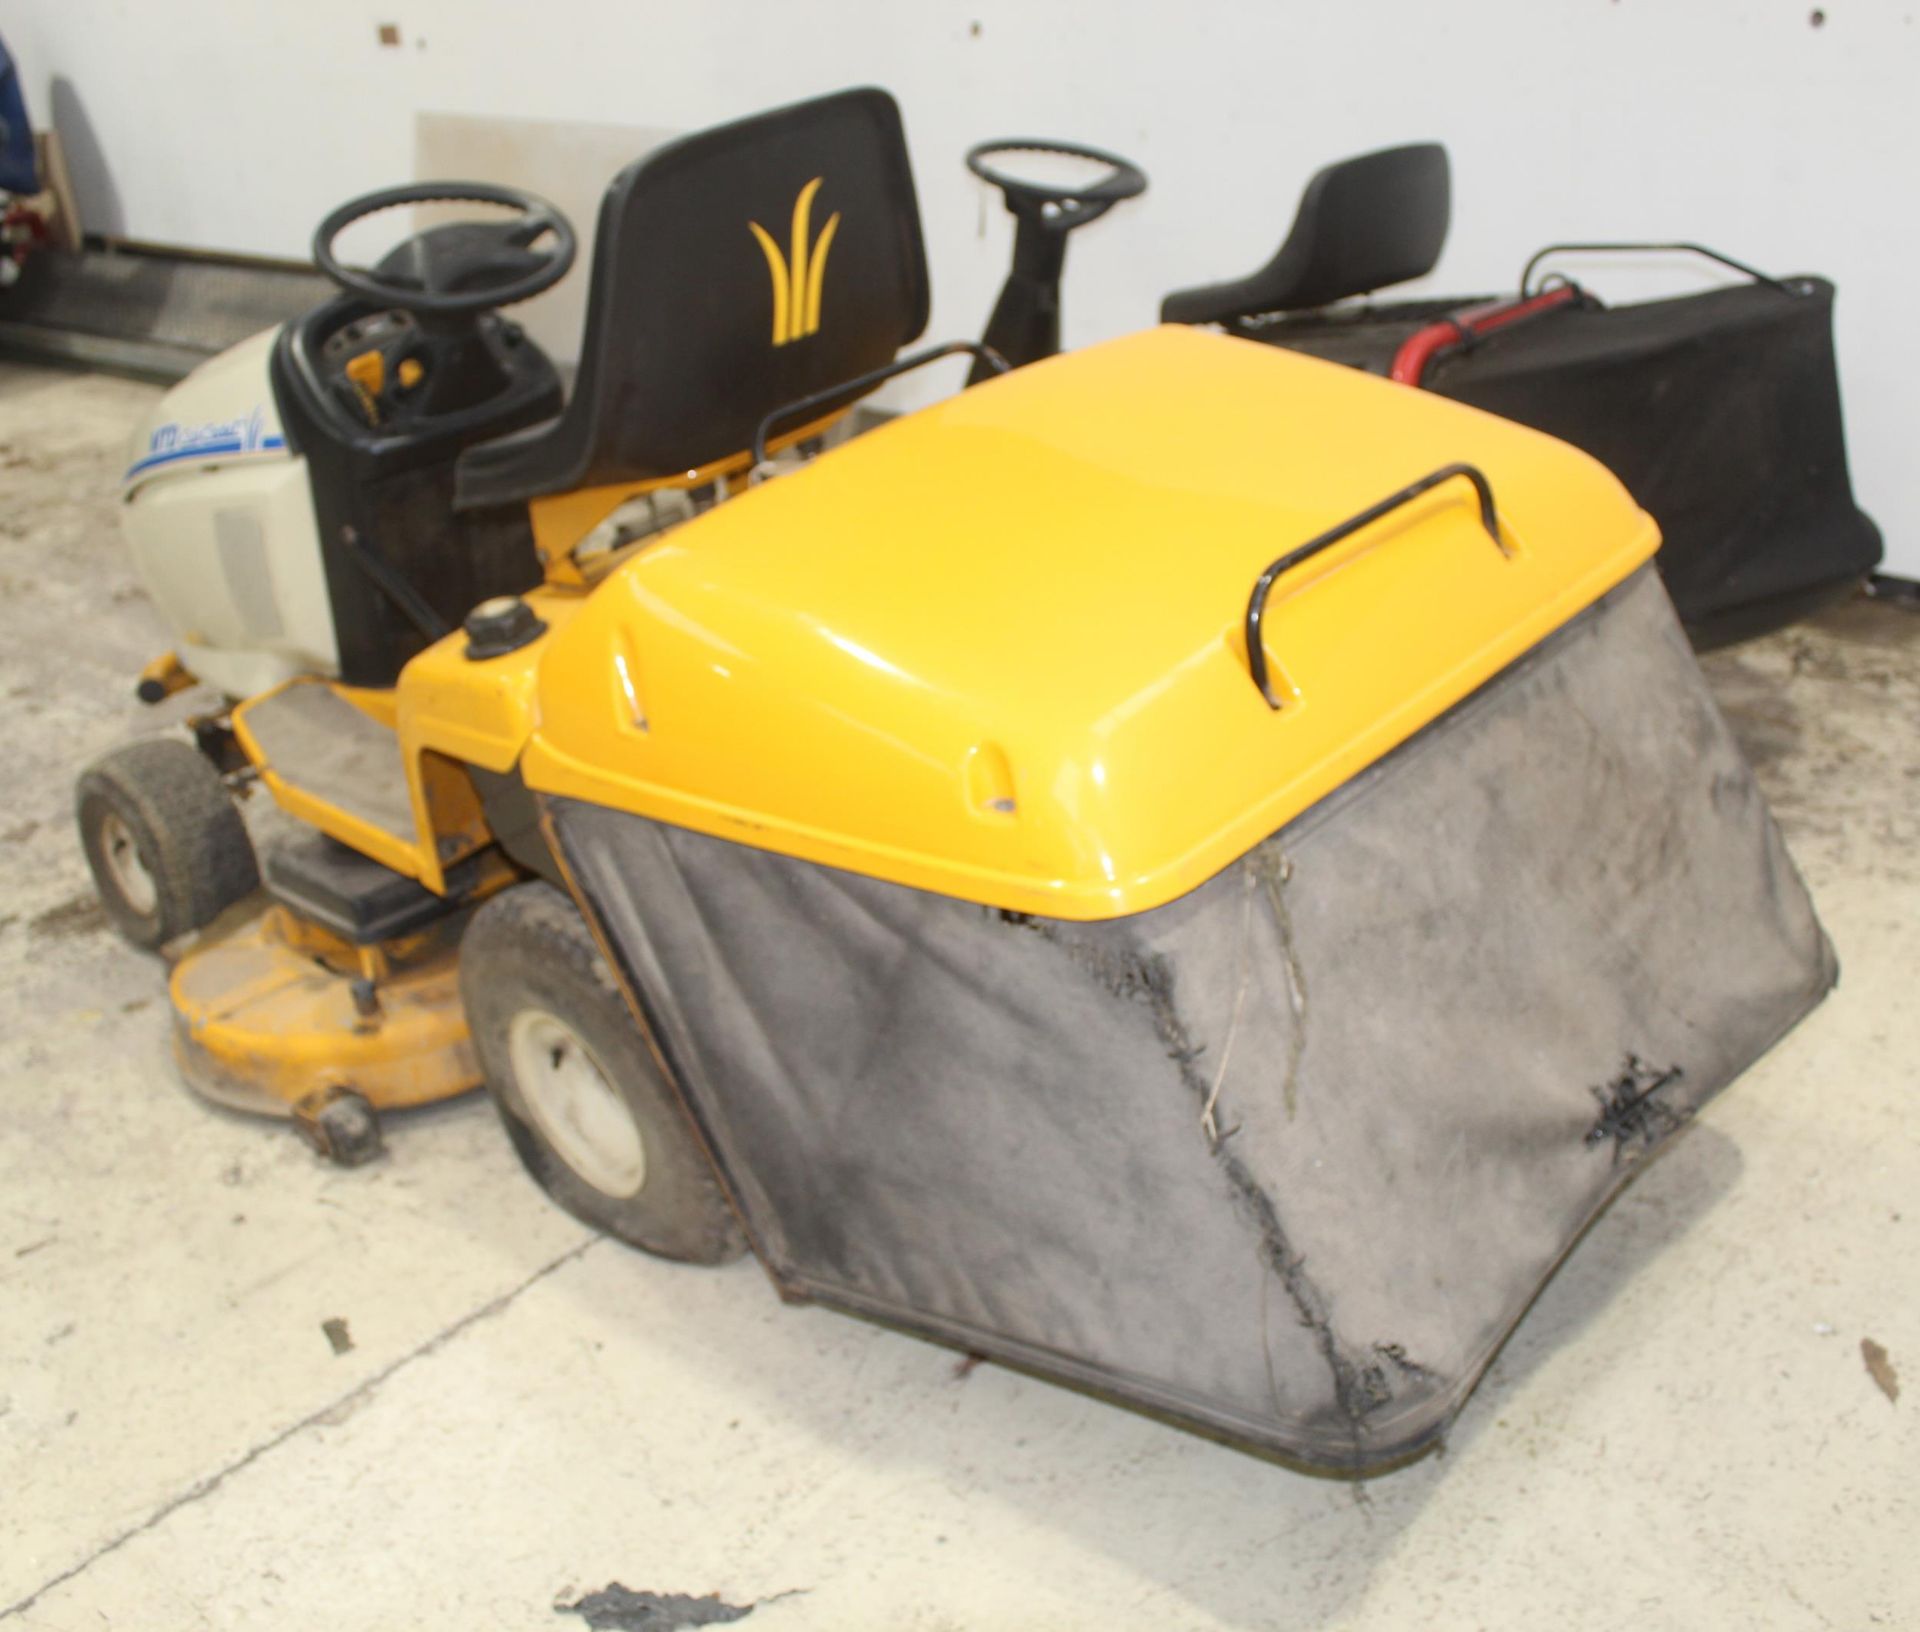 MTD CUB CADET RIDE ON MOWER WITH BRIGGS & STRATTON VANGUARD V-TWIN 20HP ENGINE + VAT KEY IN OFFICE - Image 4 of 6